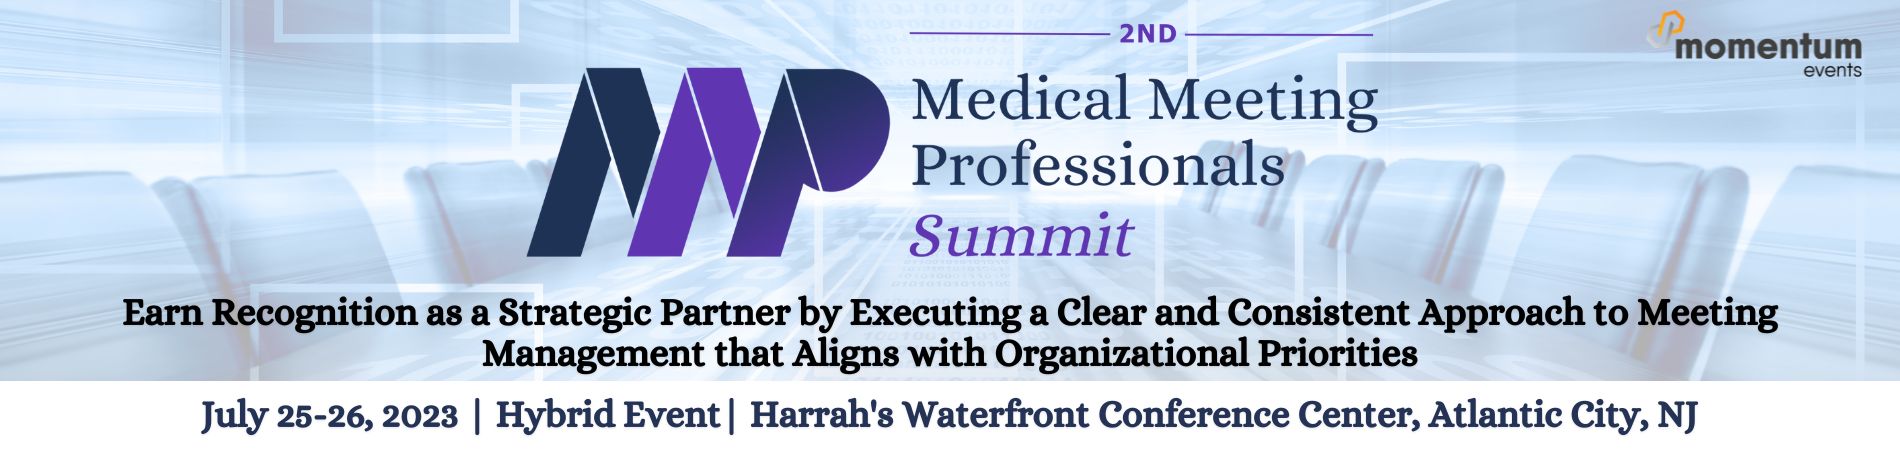 2nd Medical Meeting Professionals Summit